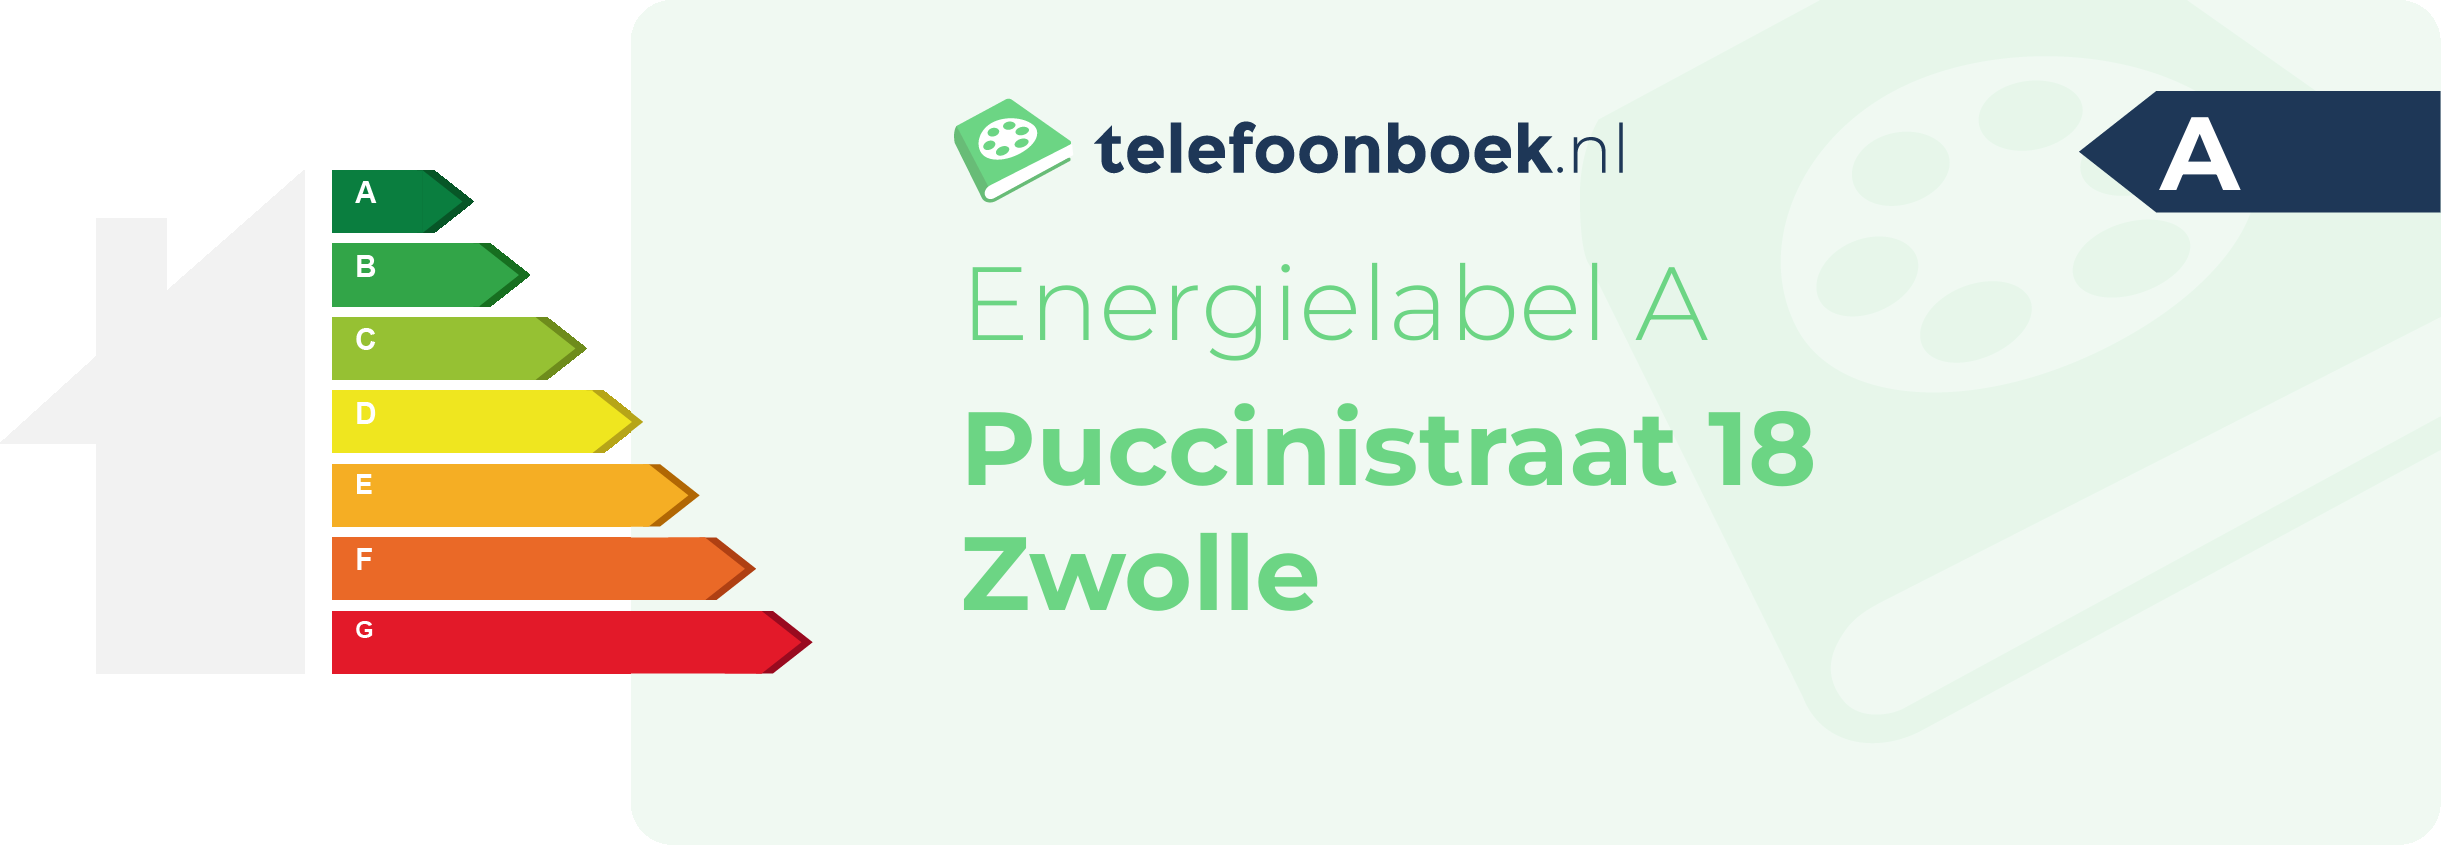 Energielabel Puccinistraat 18 Zwolle